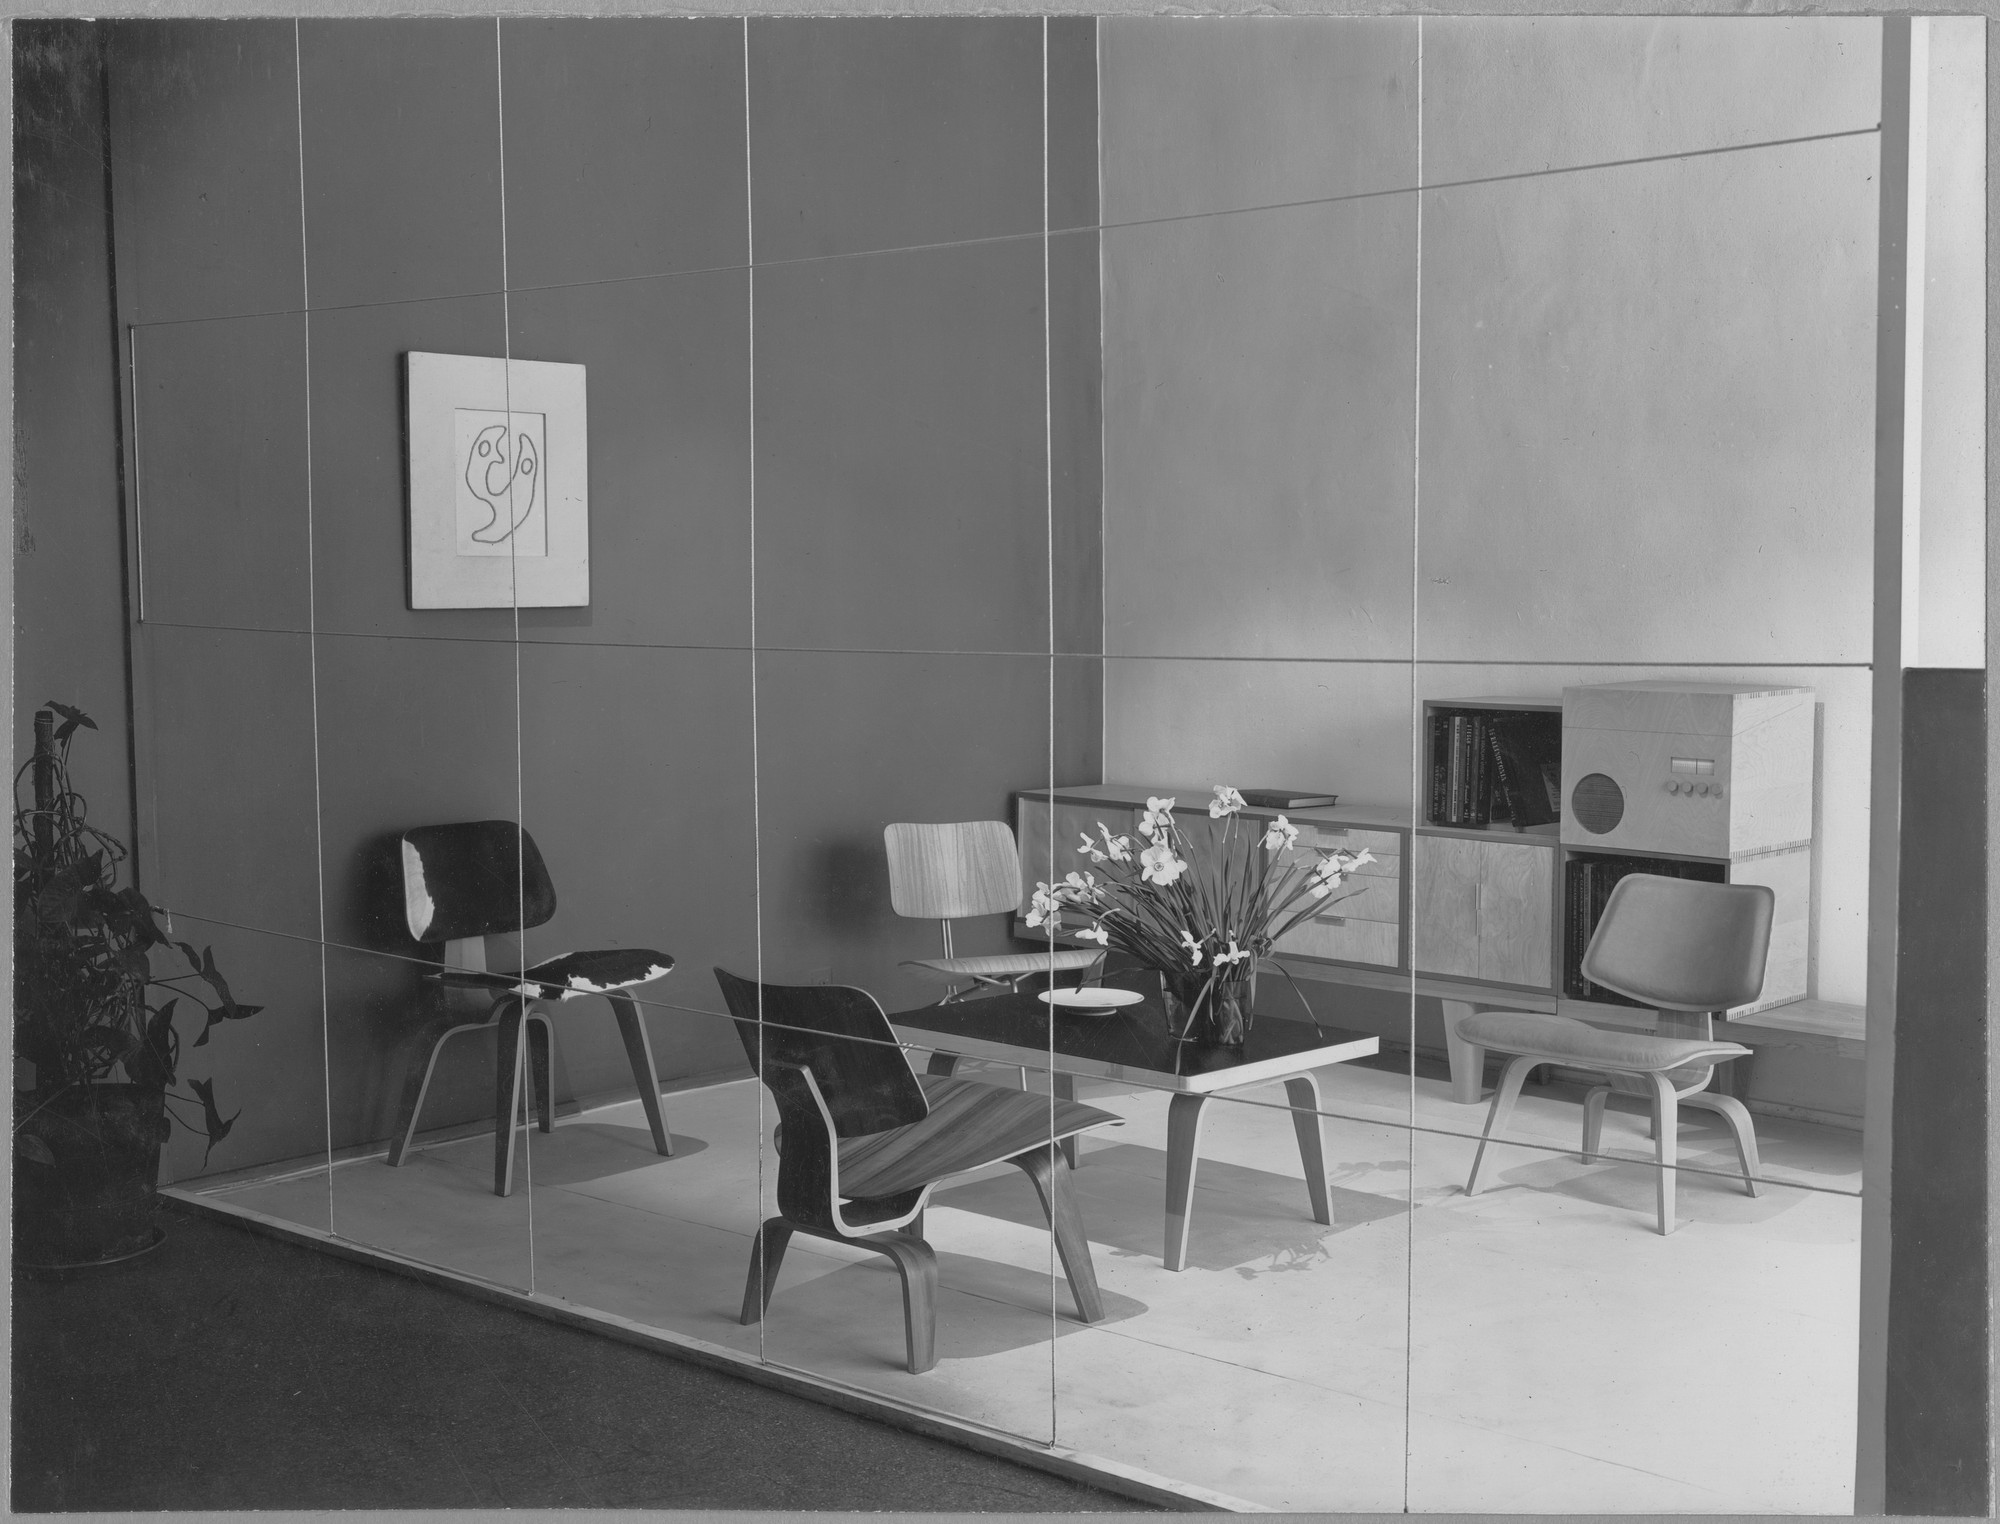 New Furniture Designed by Charles Eames | MoMA